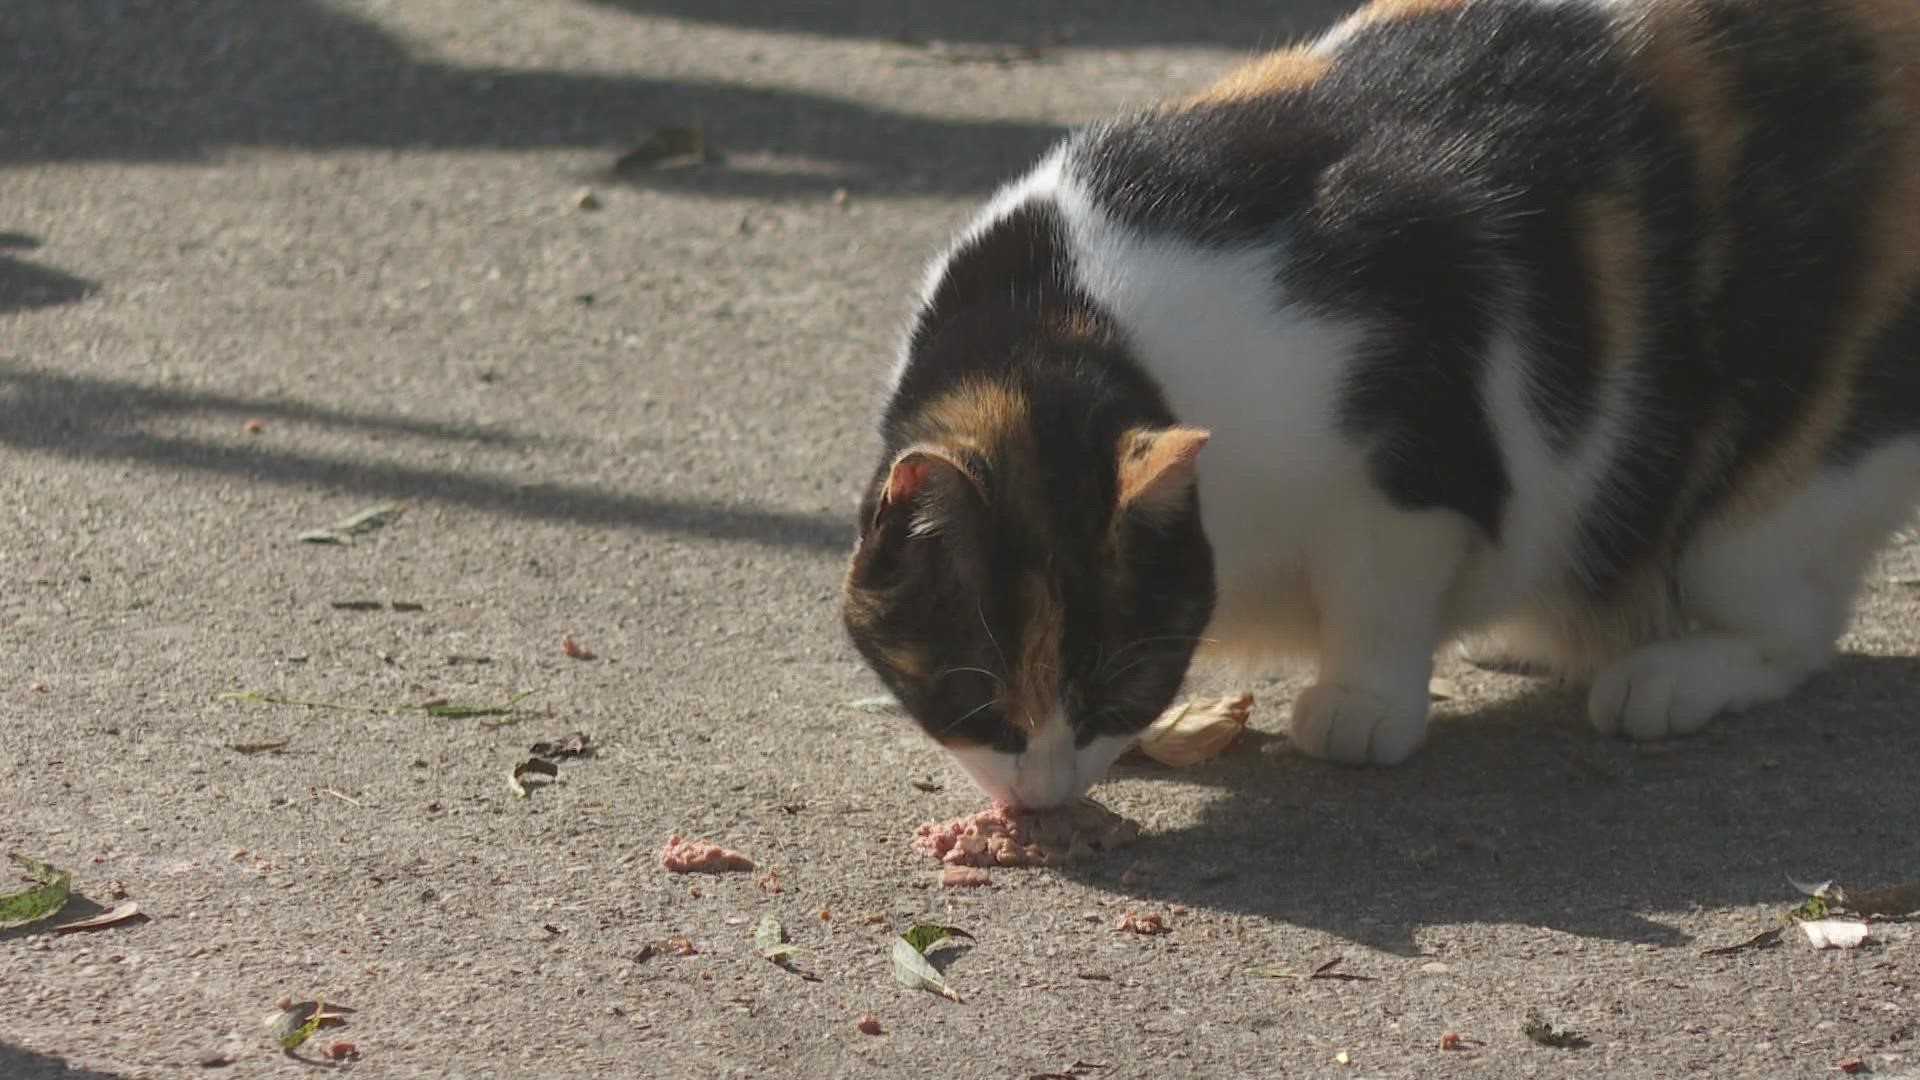 A man who takes care of cats in poor condition says he has several that are missing, more than a dozen of which were taken and dropped off across town.